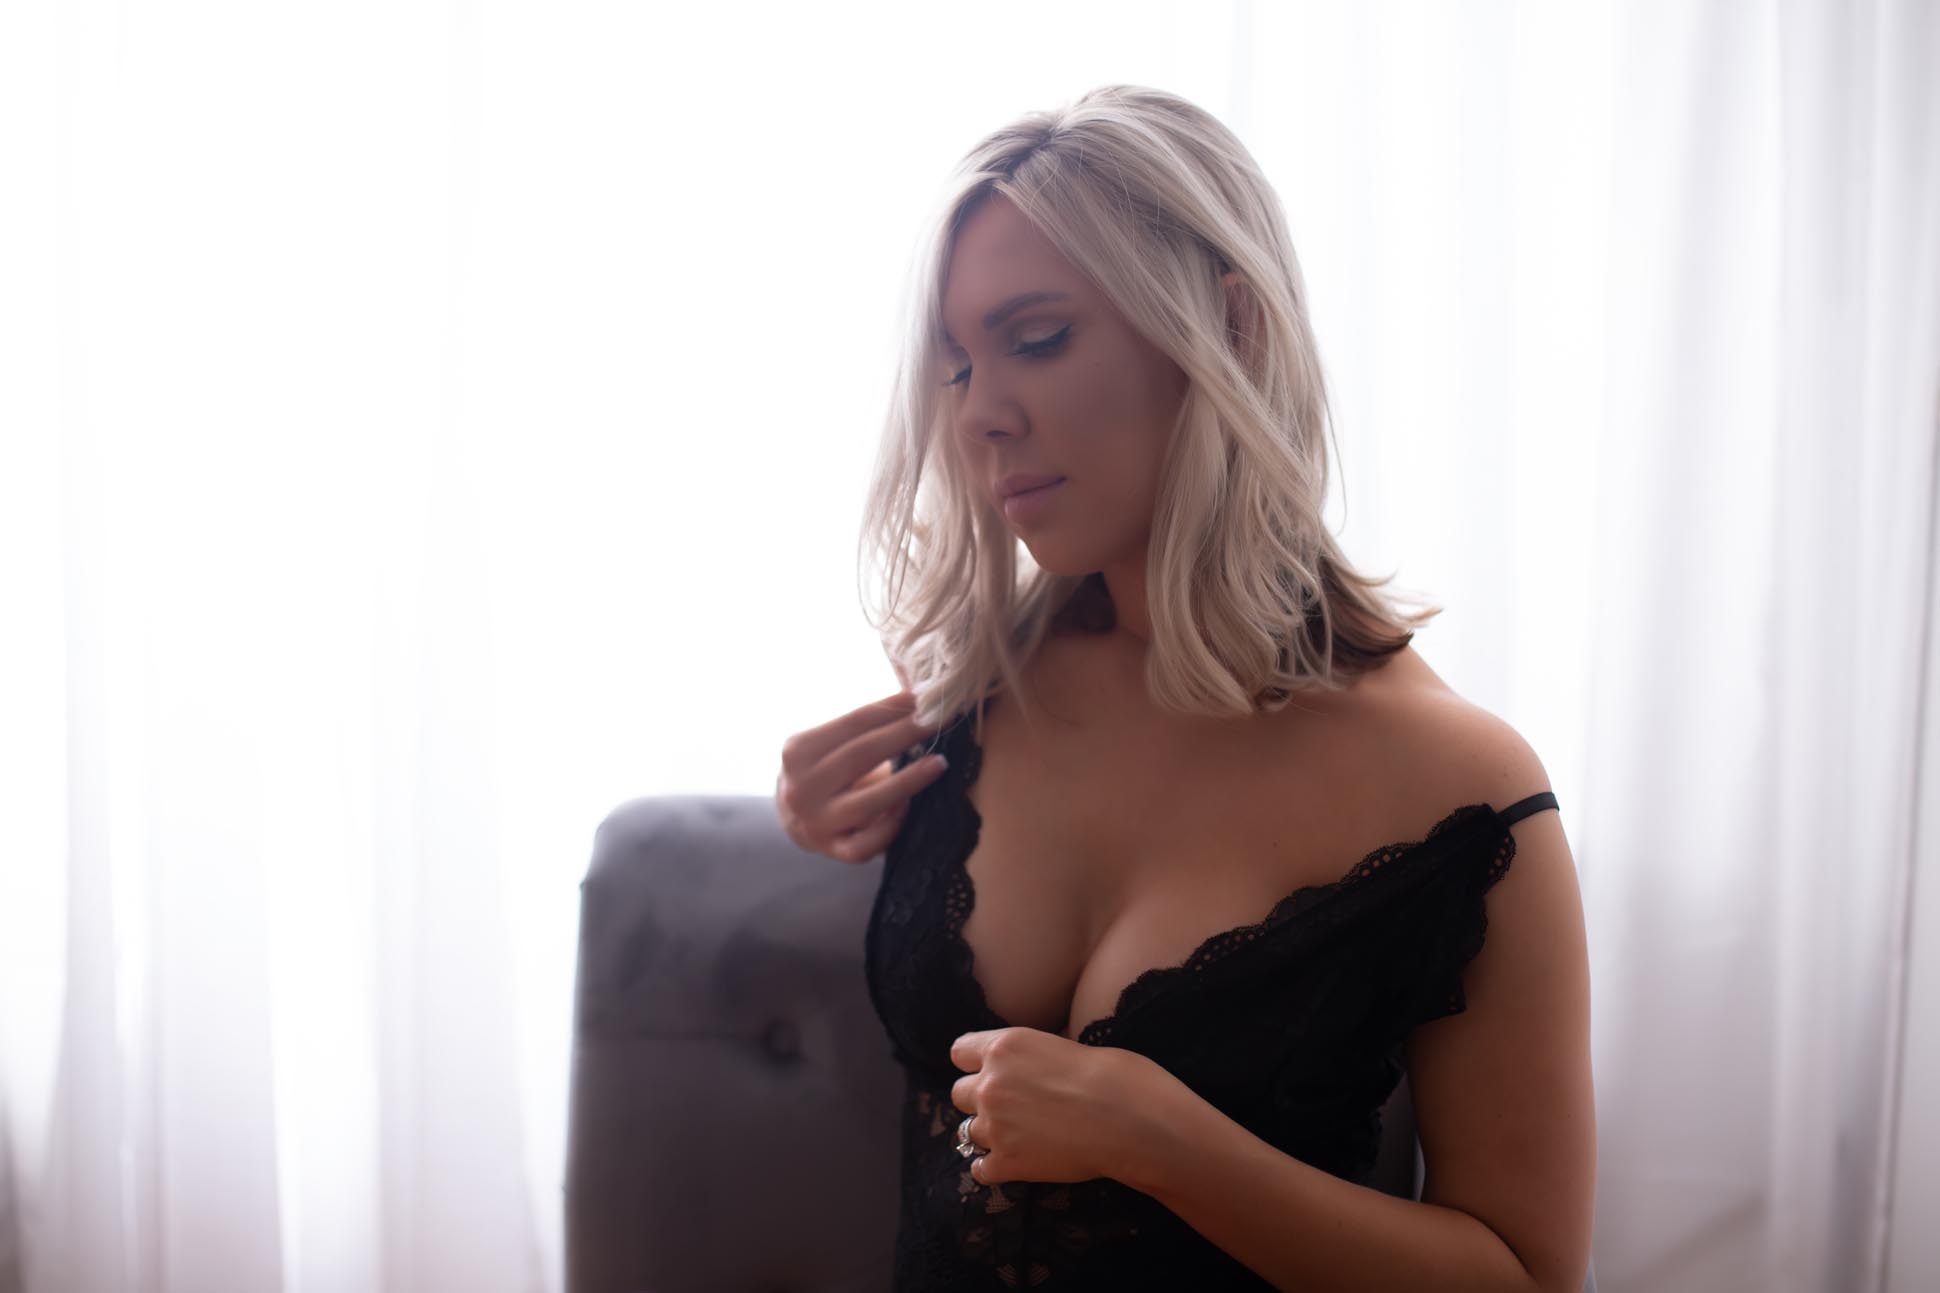 dallas boudoir photographer shares studio pictures of woman seated near sheer white curtains in black lingerie